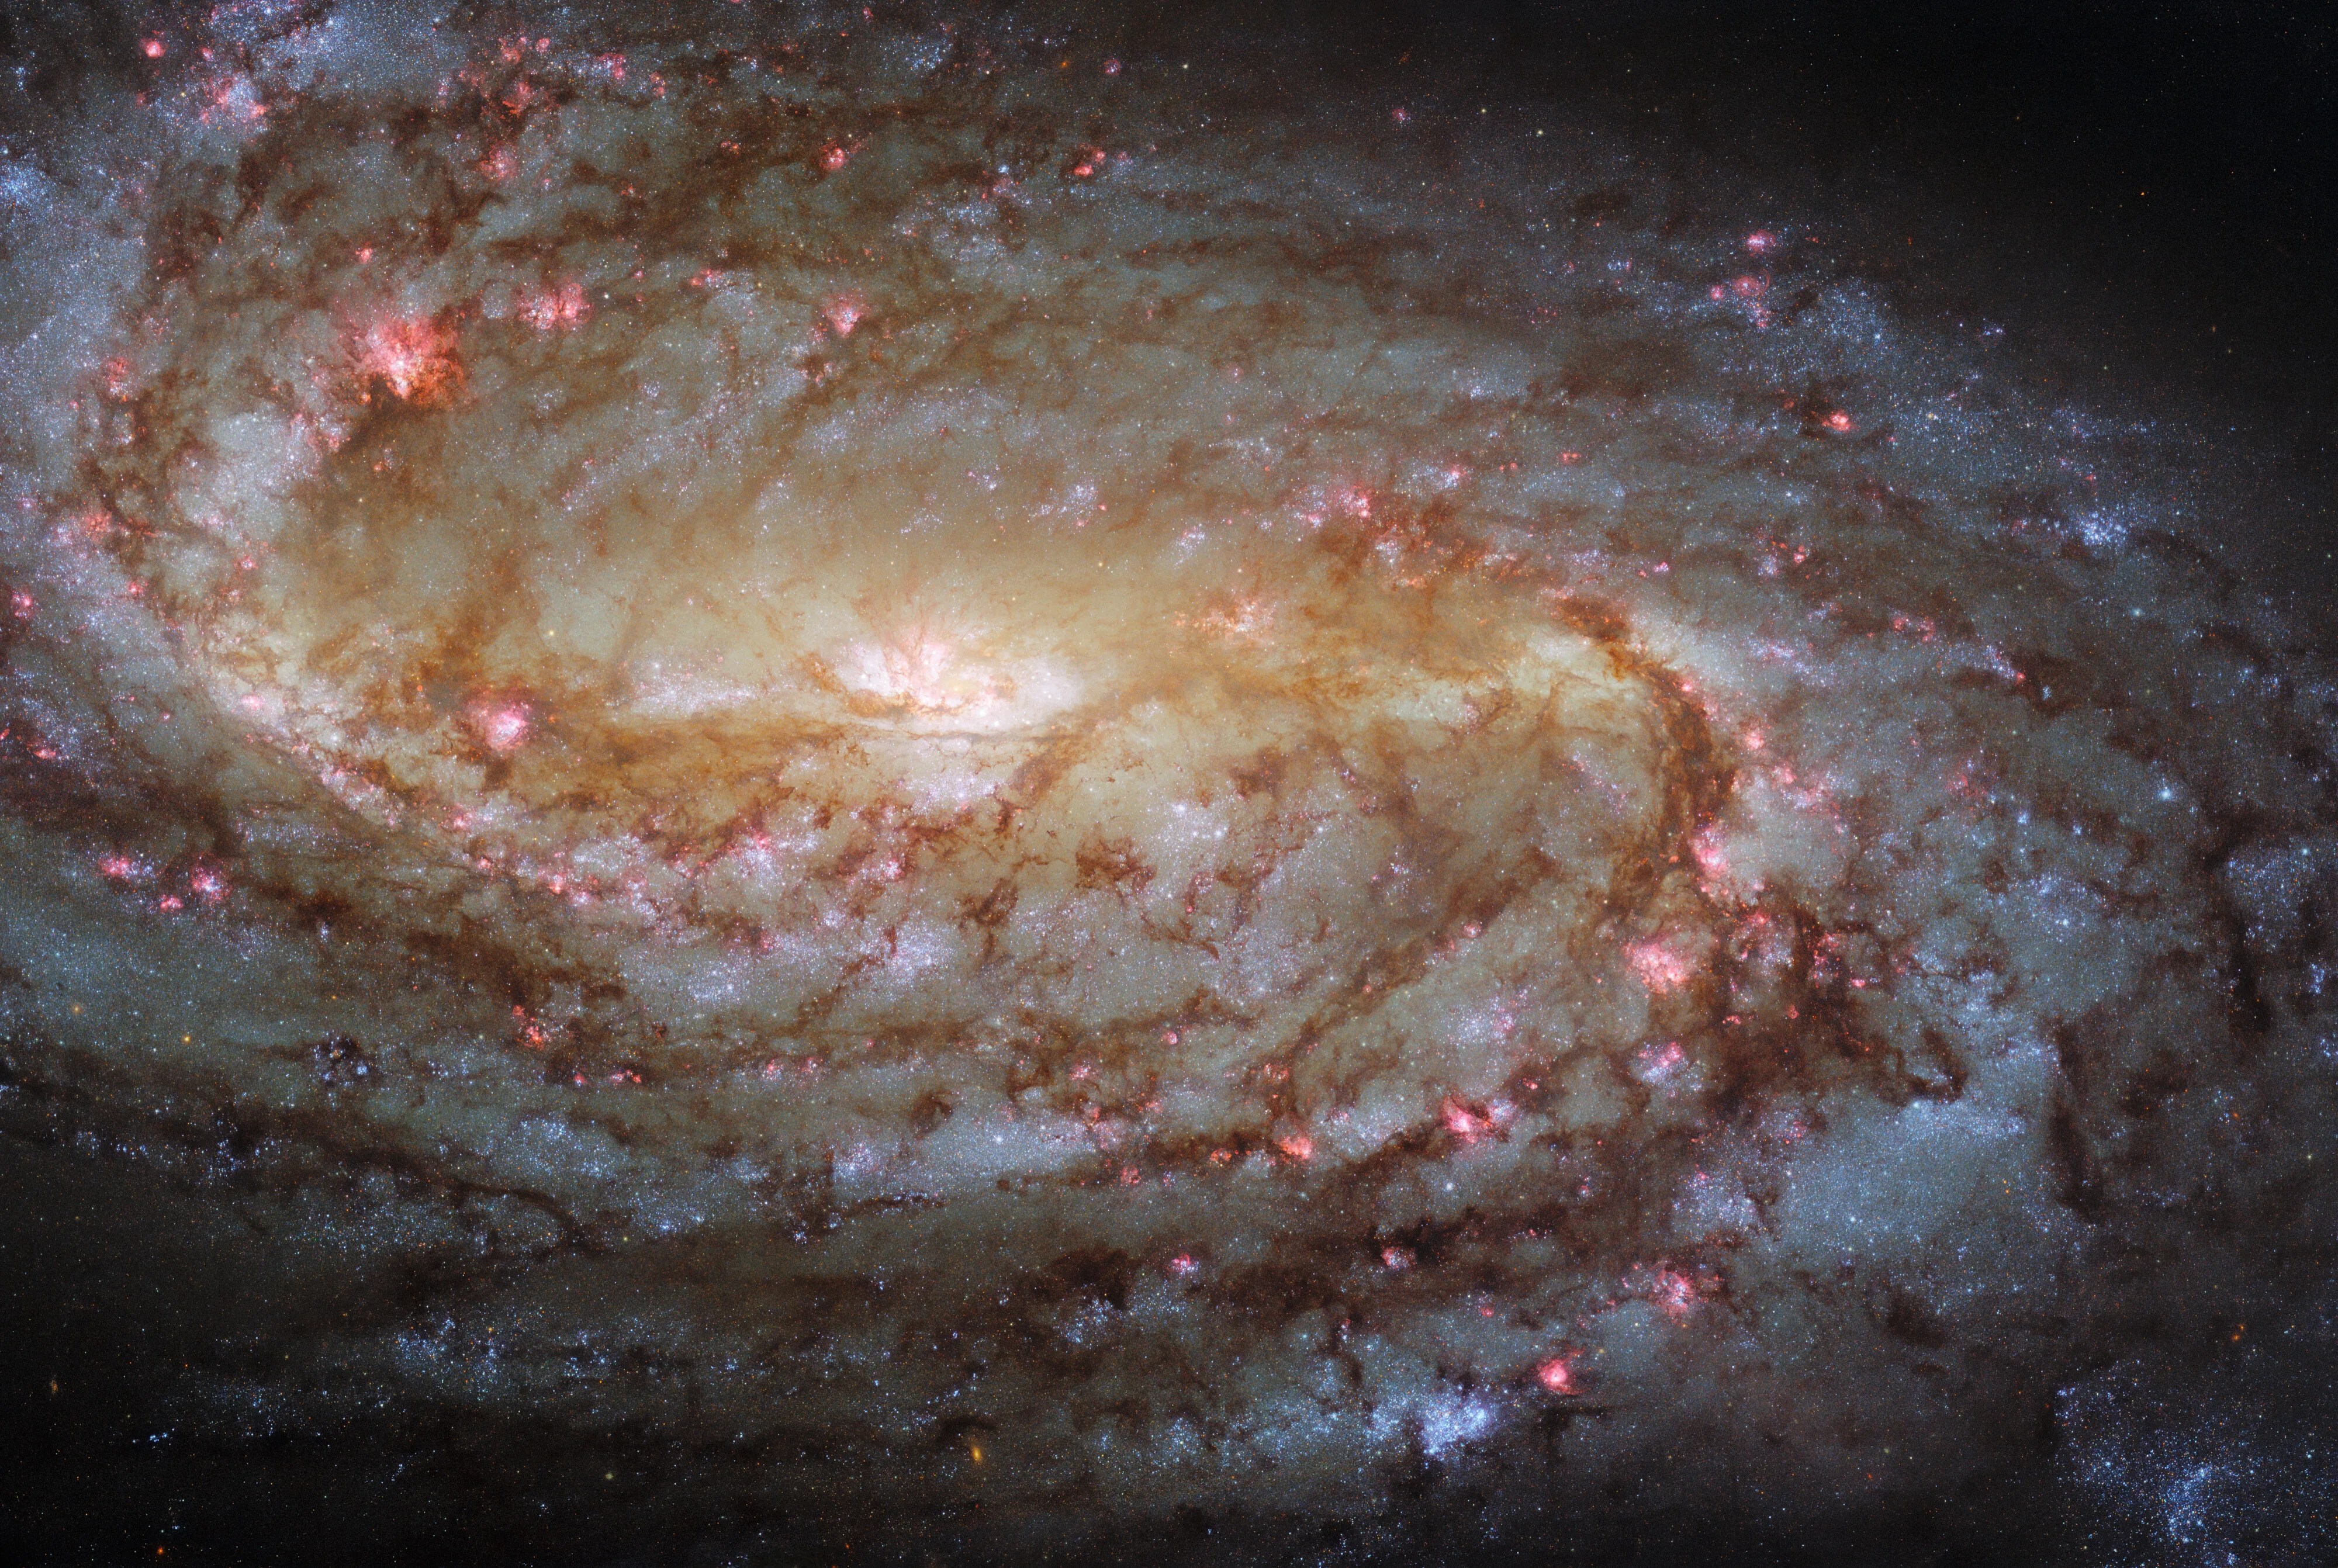 A bright spiral galaxy with dark dust lanes and star-forming regions along its spiral arms.